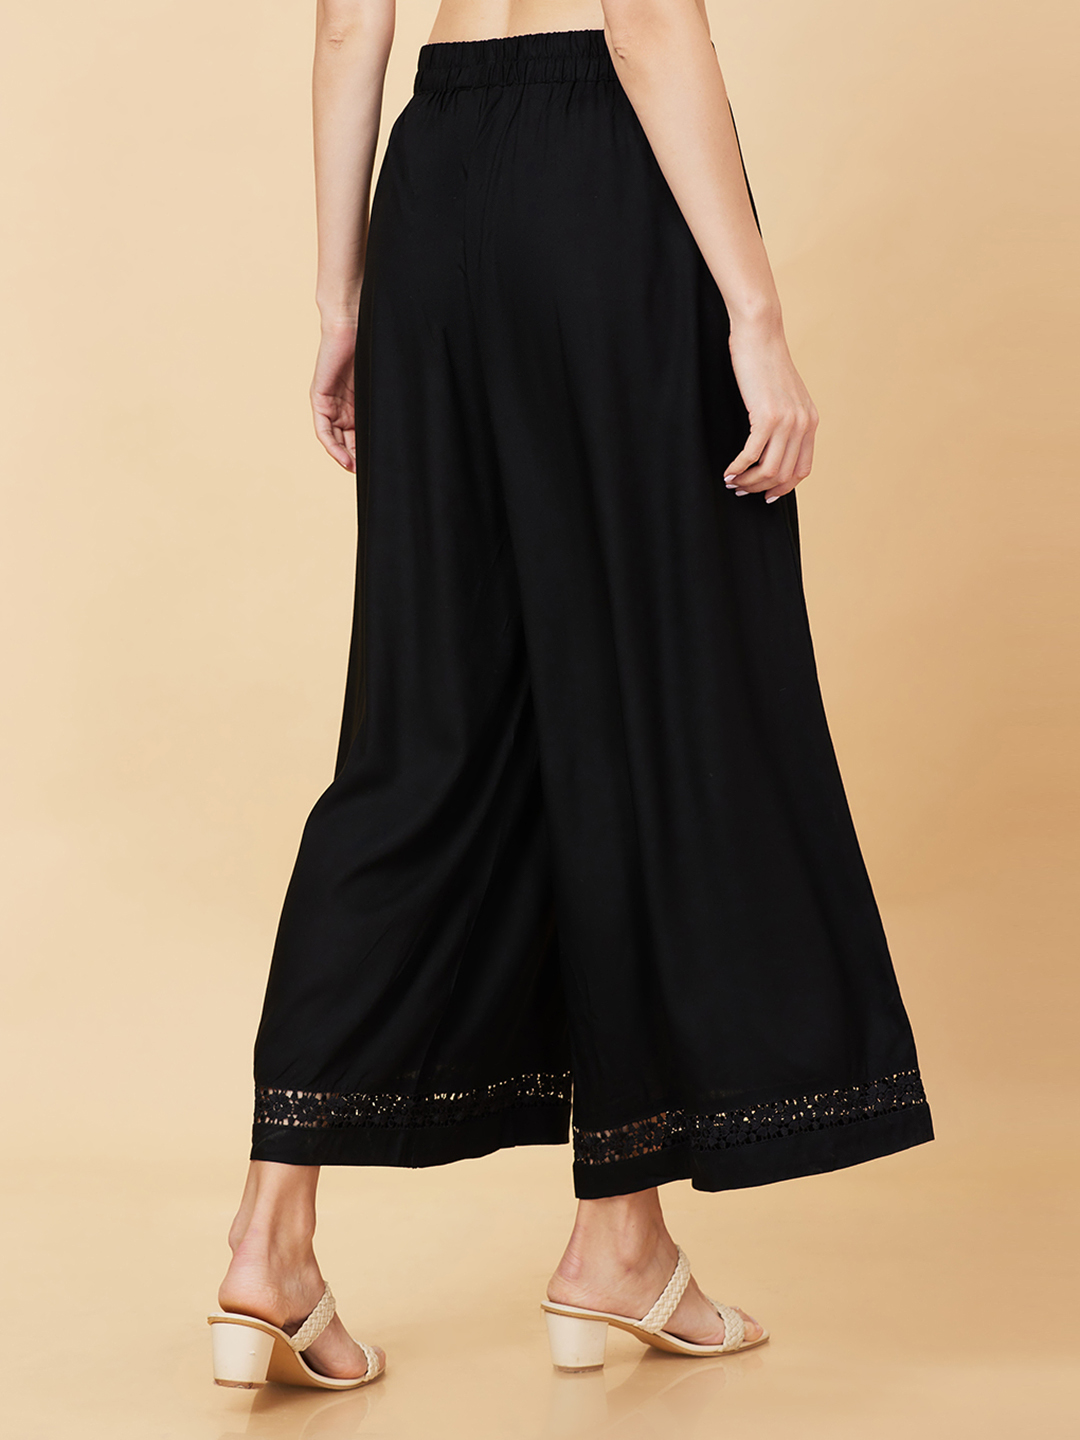 Globus Women Black Solid Ethnic Wide Leg Palazzo with Lace at Hem